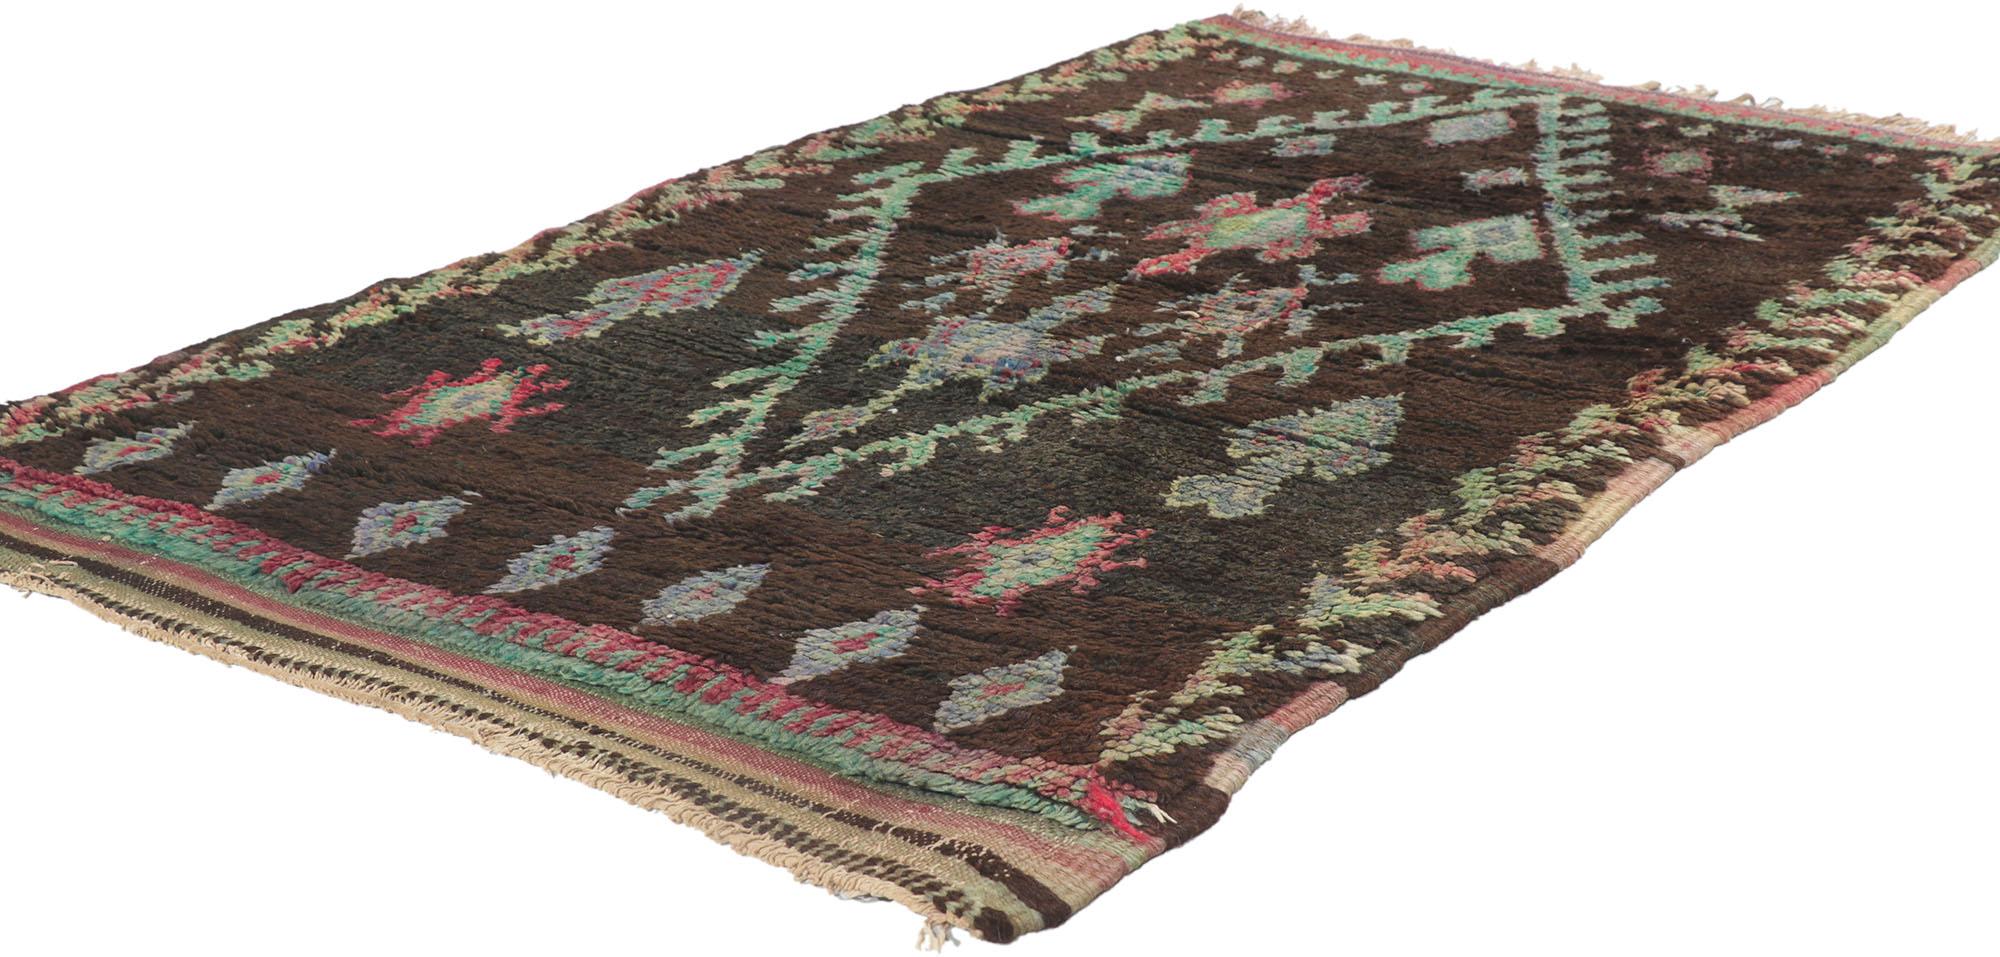 21619 Vintage Berber Moroccan Azilal Rug, 02'10 x 04'02. 
Nomadic Charm collides with esoteric elegance in this hand knotted wool vintage Berber Moroccan Azilal rug. The eye-catching geometric pattern and lively colors woven into this vintage